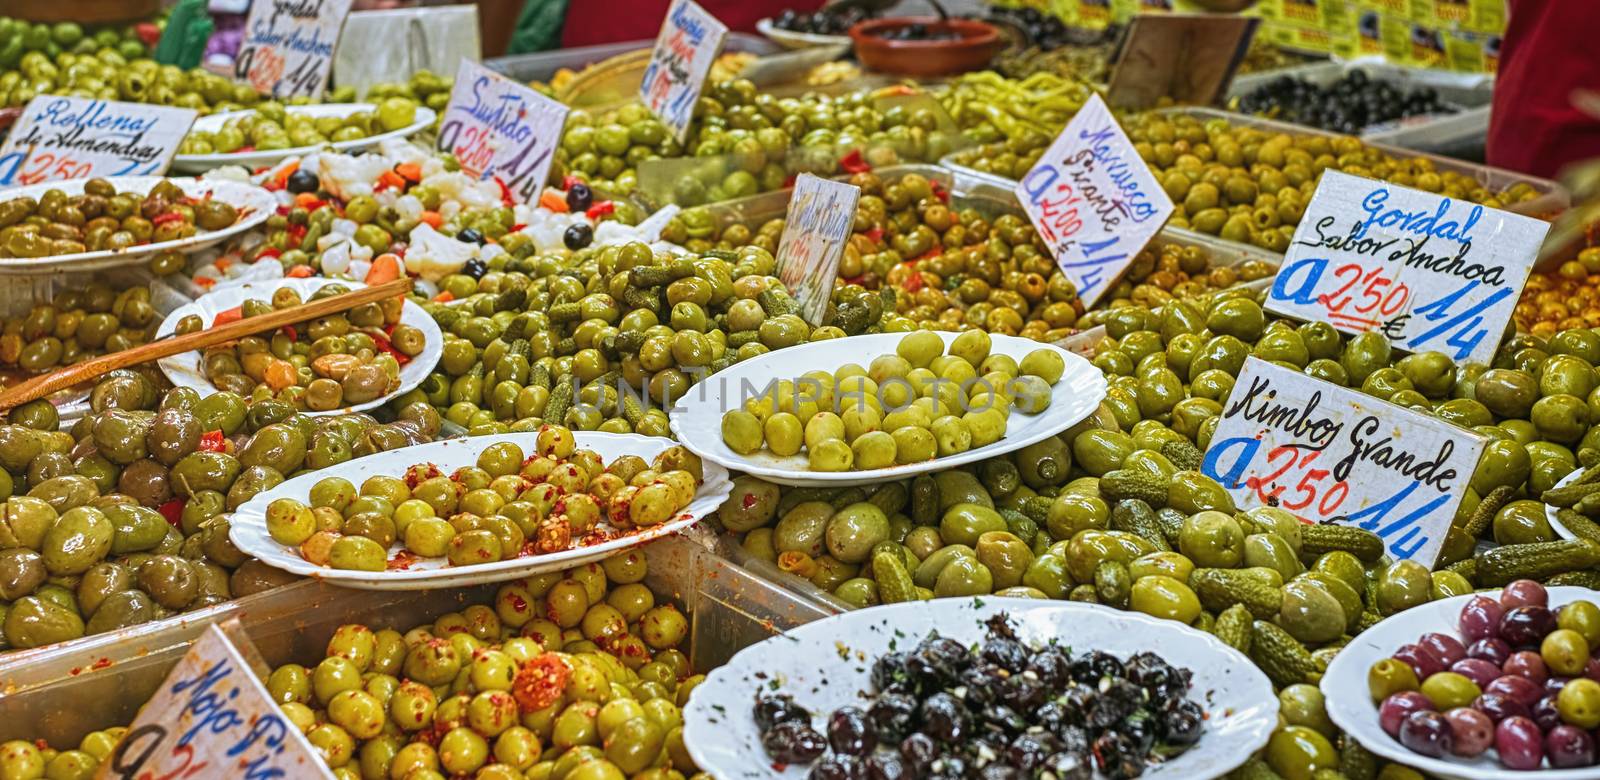 Olive stand at the market by Roberto